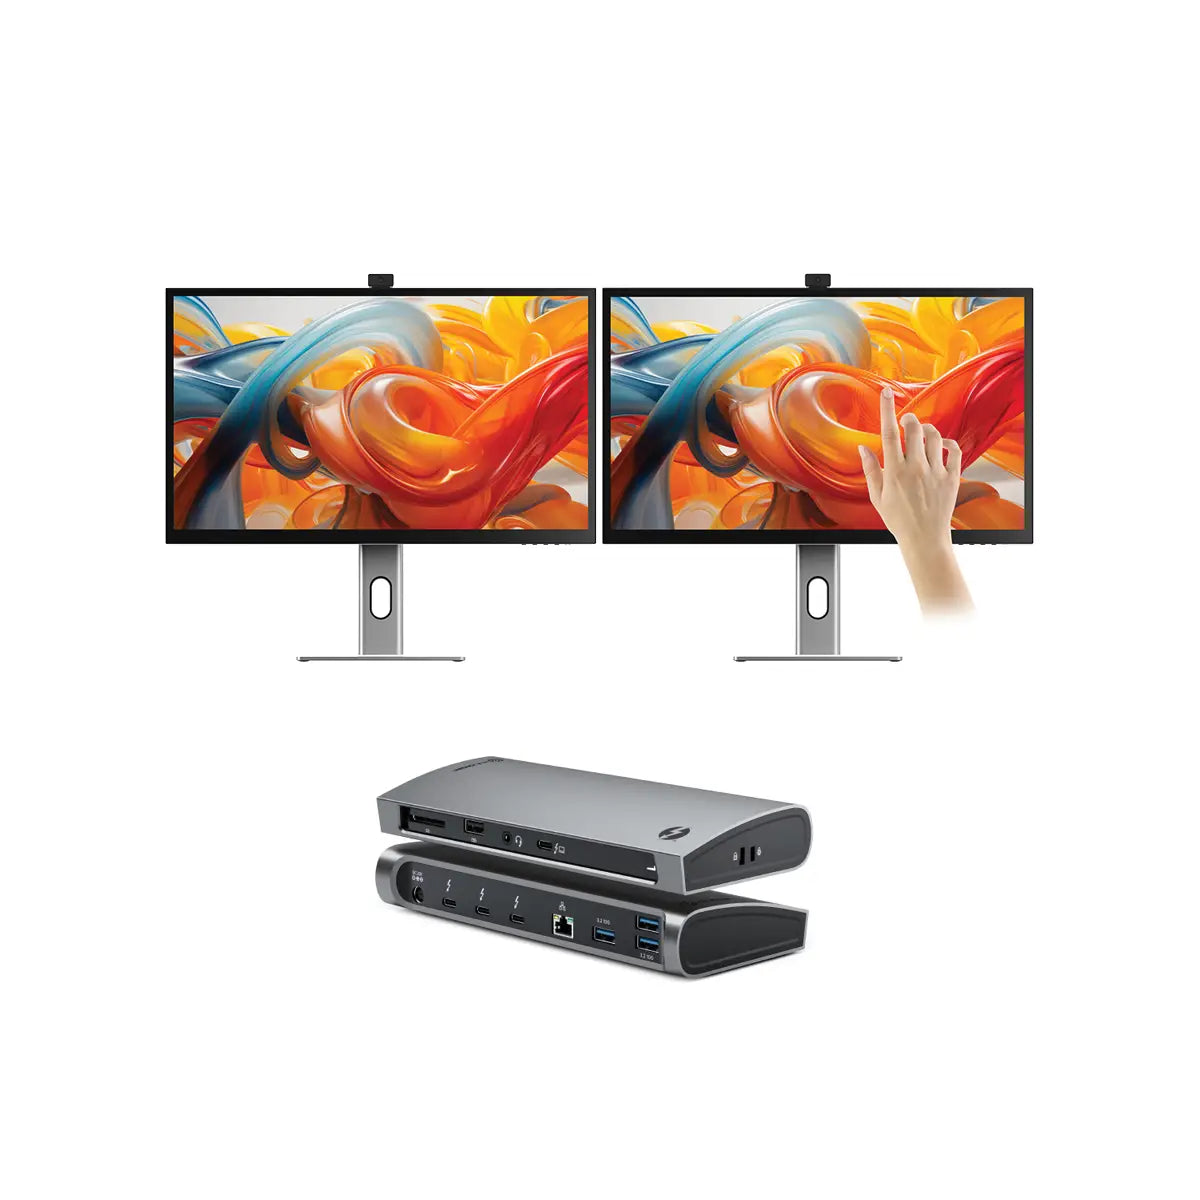 clarity-pro-touch-27-uhd-4k-monitor-with-65w-pd-webcam-and-touchscreen-pack-of-2-thunderbolt-4-blaze-docking-station1